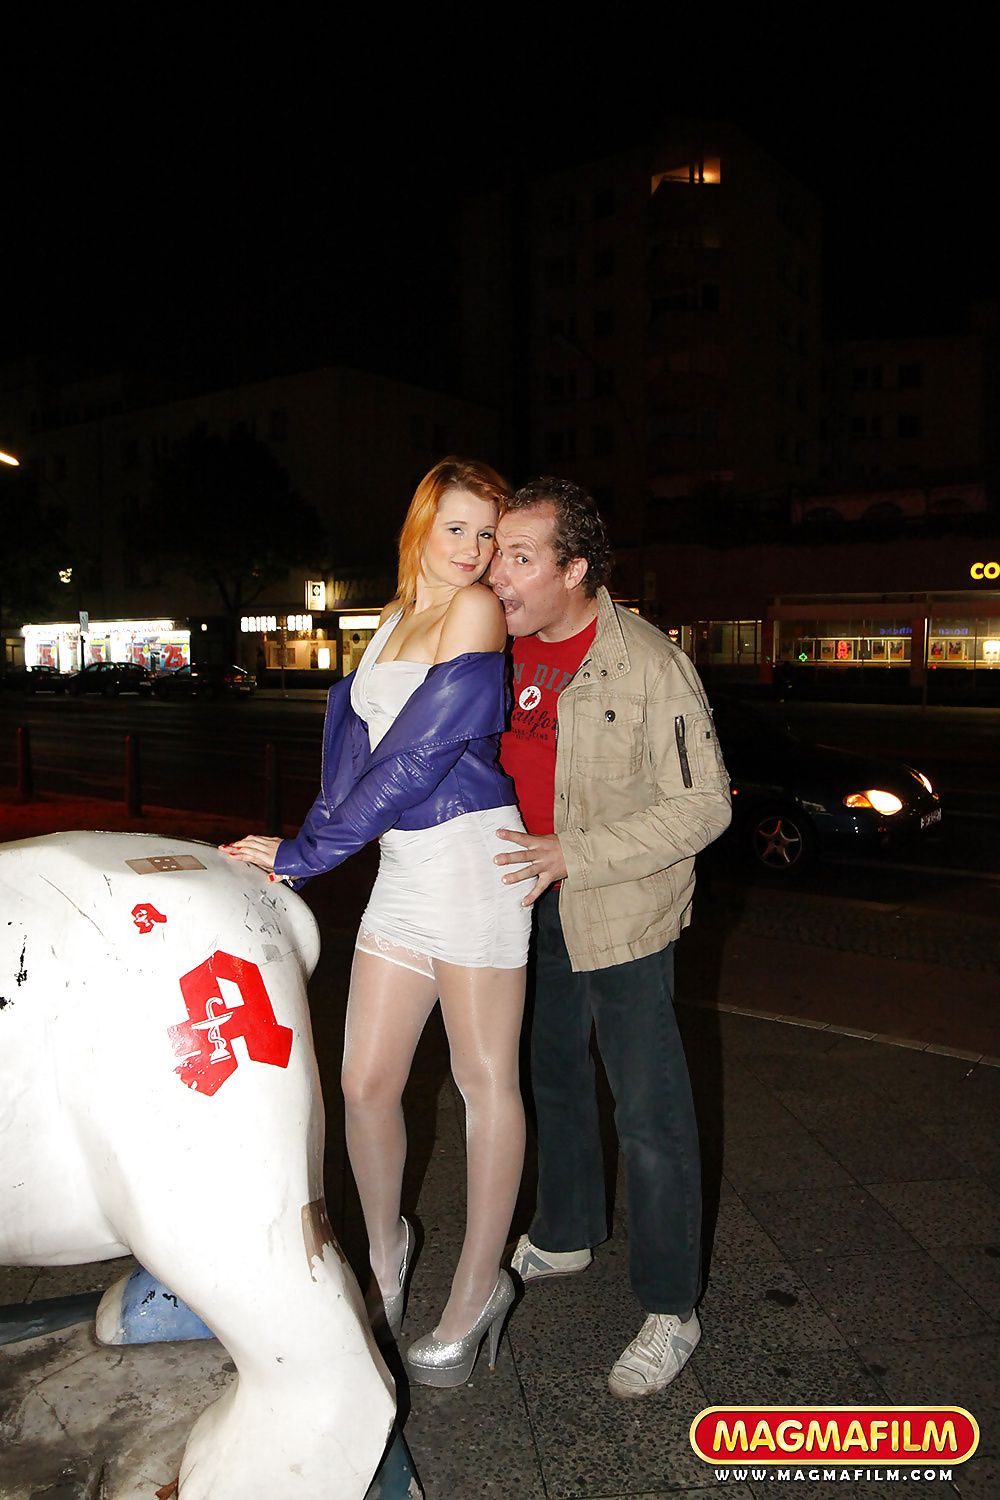 Magmafilm Redhead gets fucked on the street in public #2